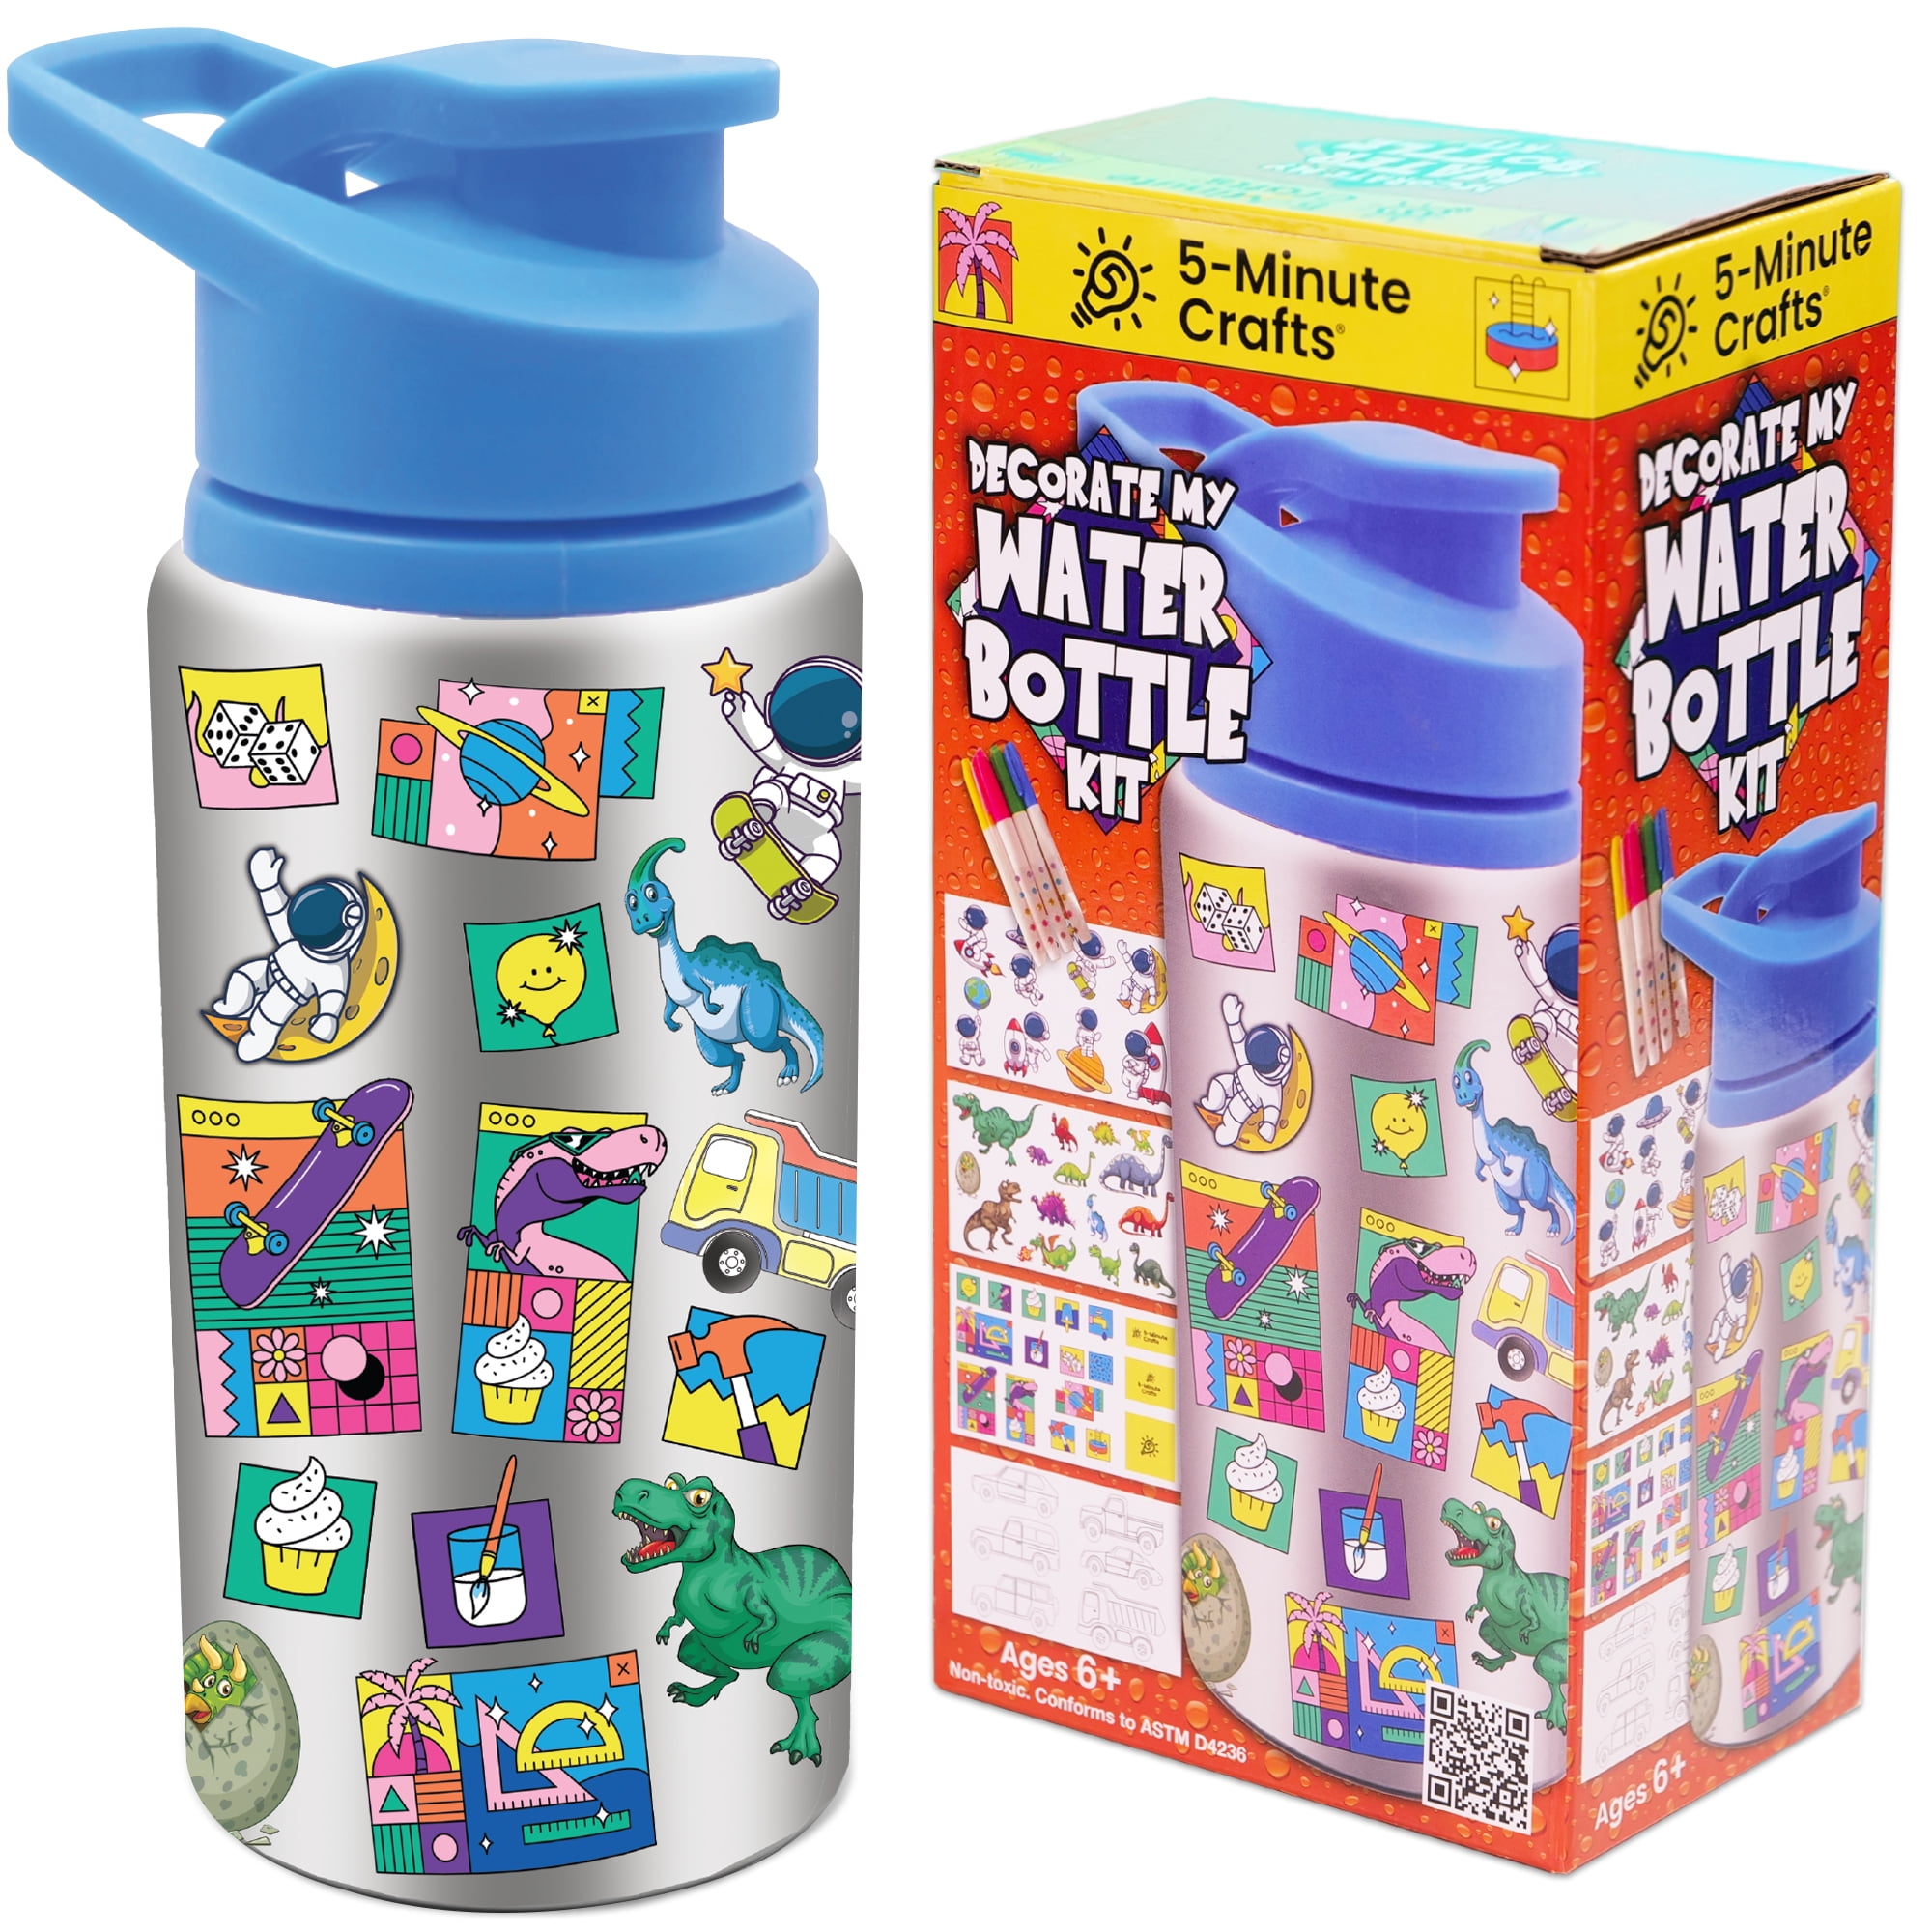 5-Minute Crafts - Kids Boy Bottle with Stickers Kit as Seen on Social Media